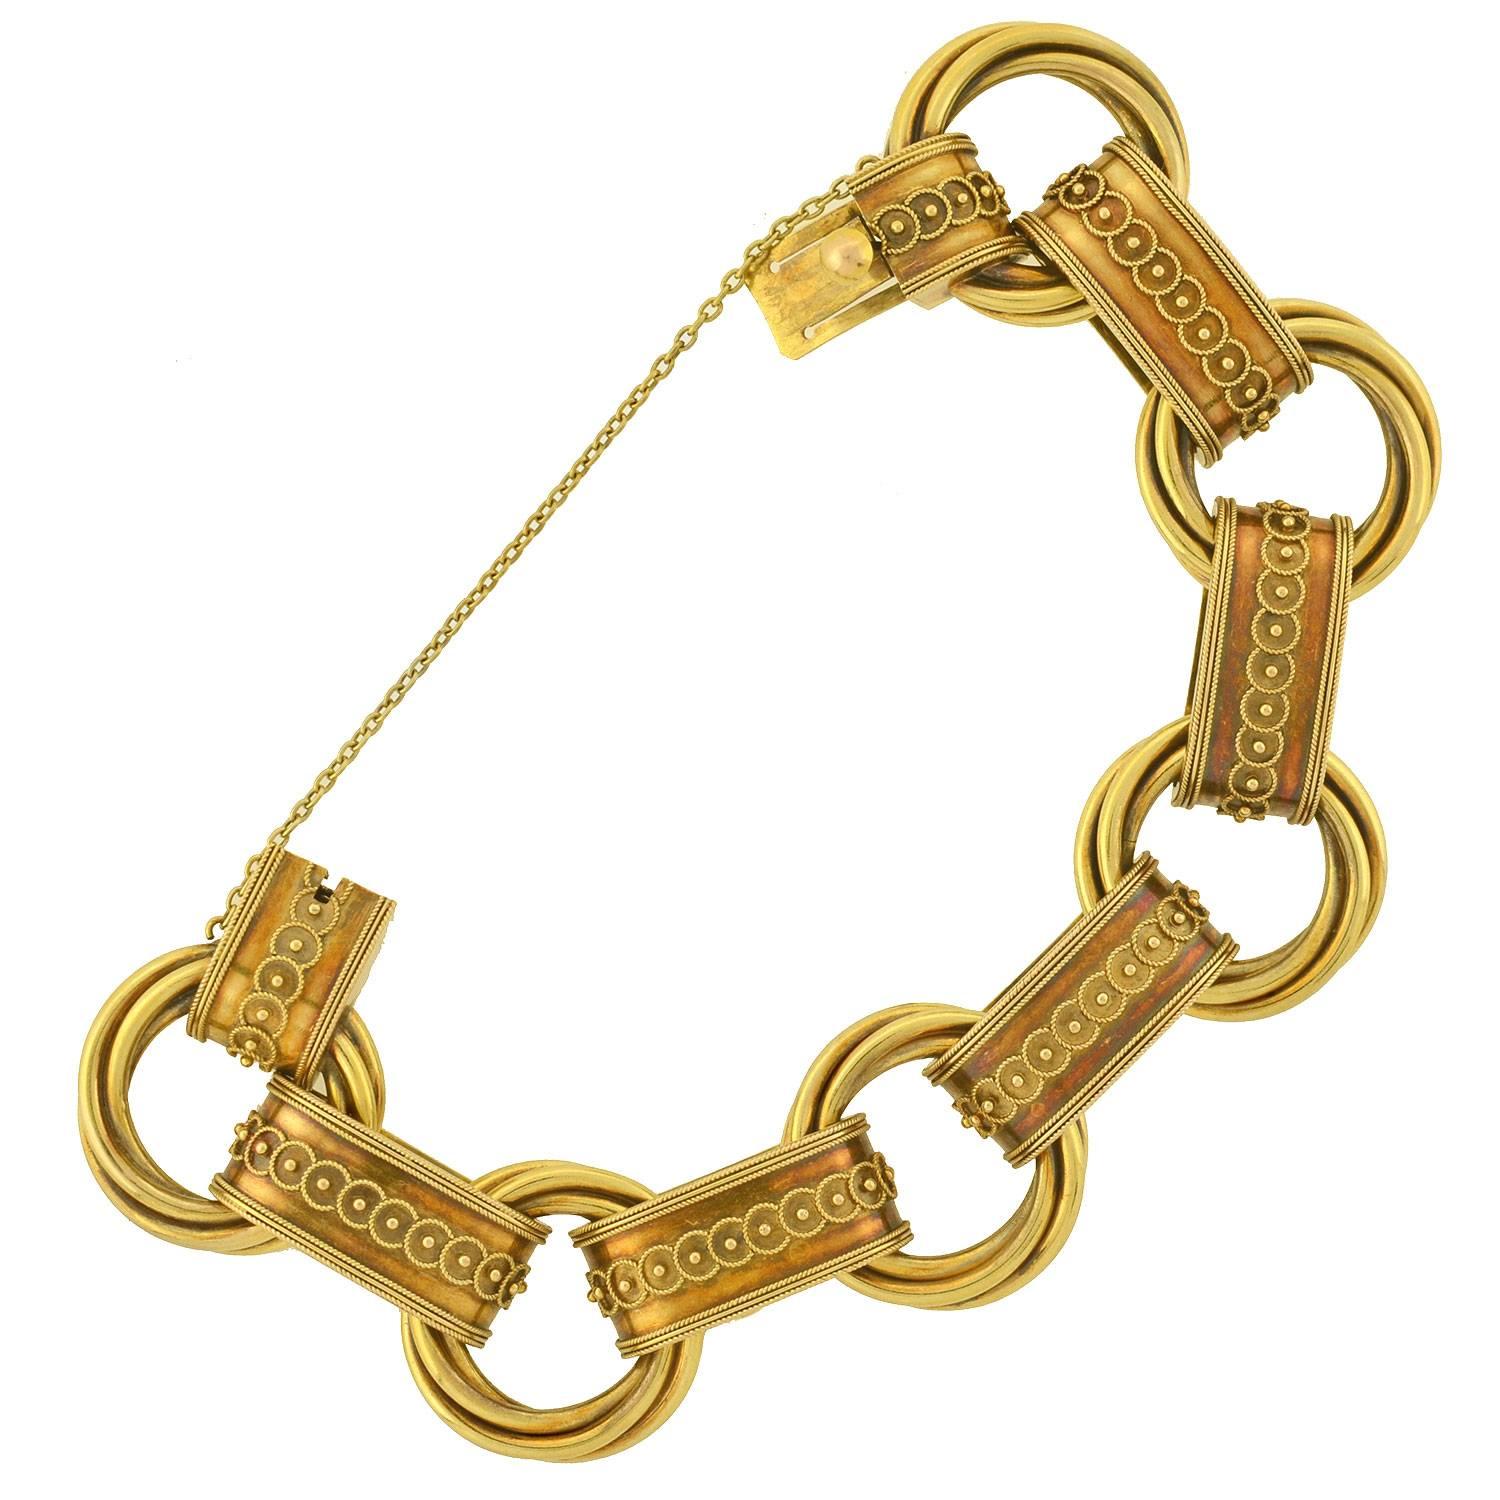 This unusual gold link bracelet from the Victorian era (ca1880) is quite a special piece! The bracelet is crafted in vibrant 18kt yellow gold, and is comprised of an alternating design of 12 book chain links. Fine Etruscan wirework and beadwork